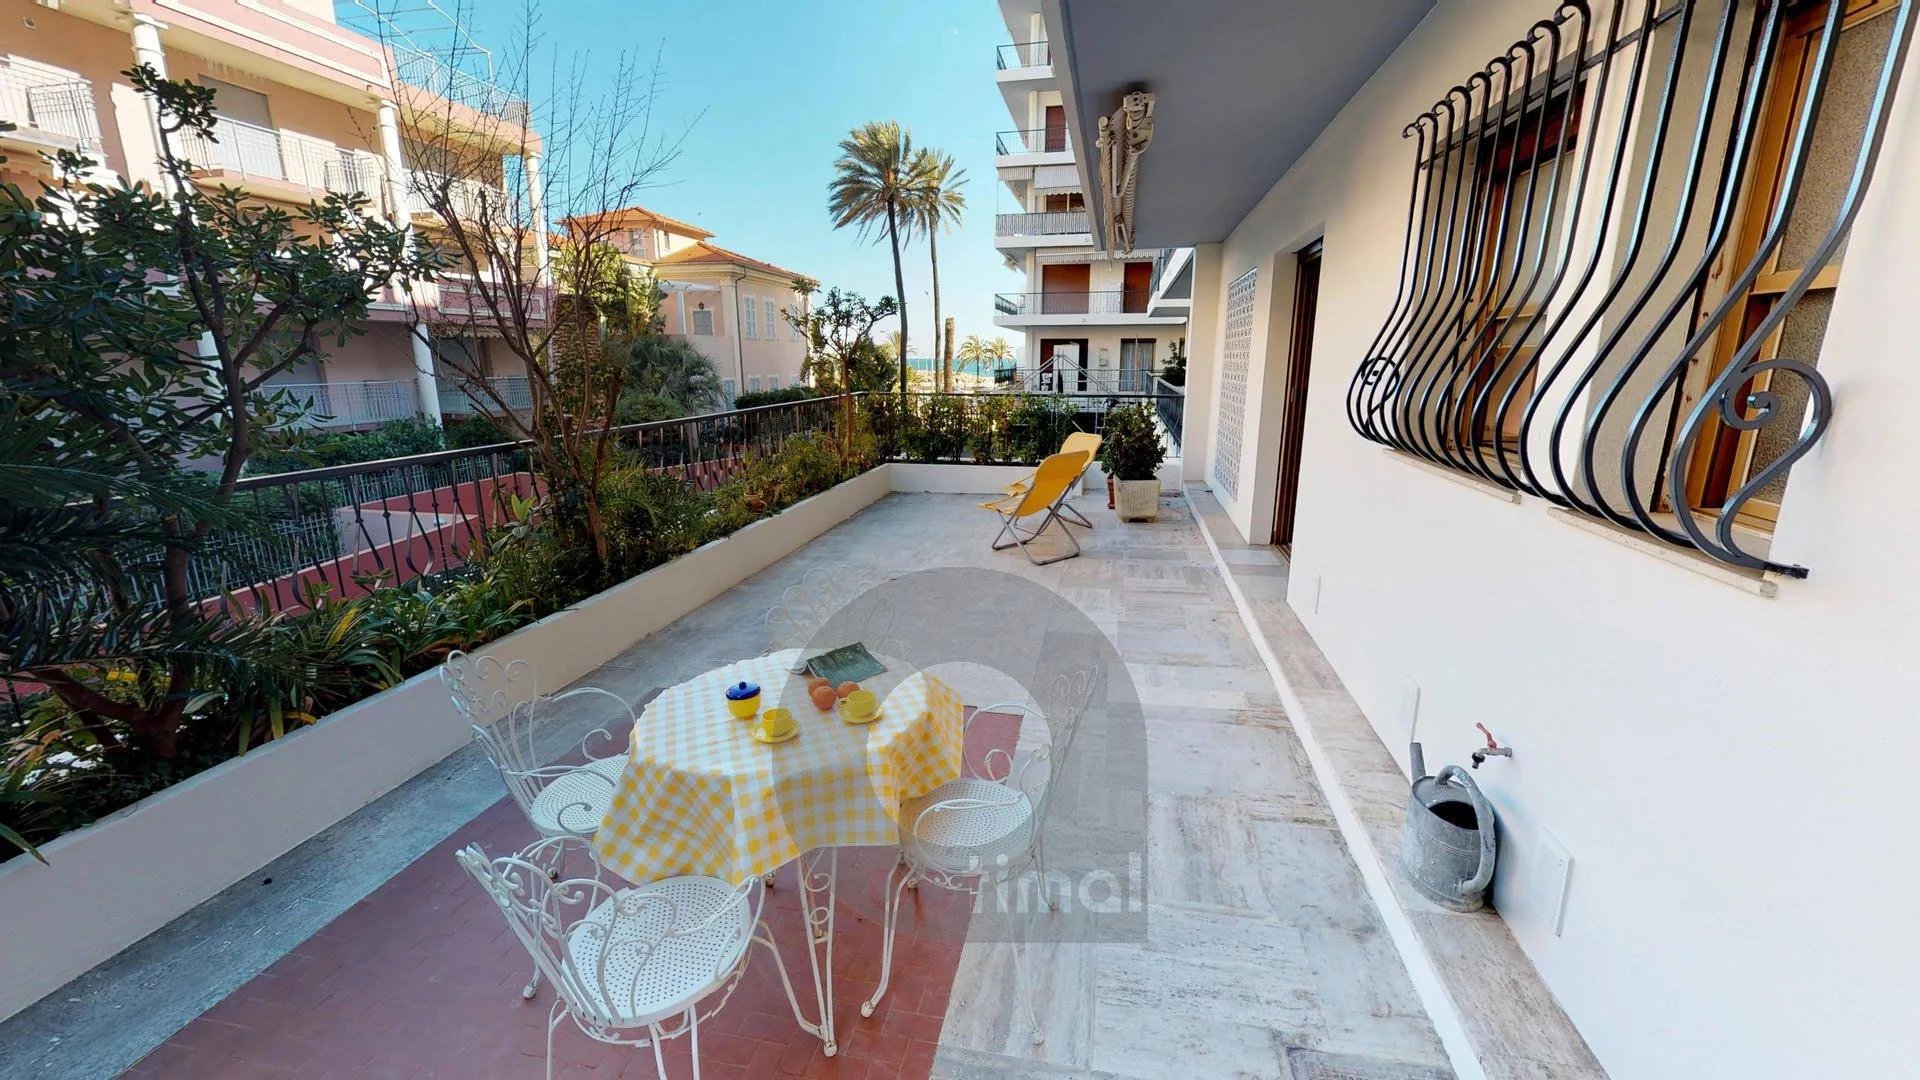 Beautiful 2 rooms apartment with big terrace and garage close to the sea and center